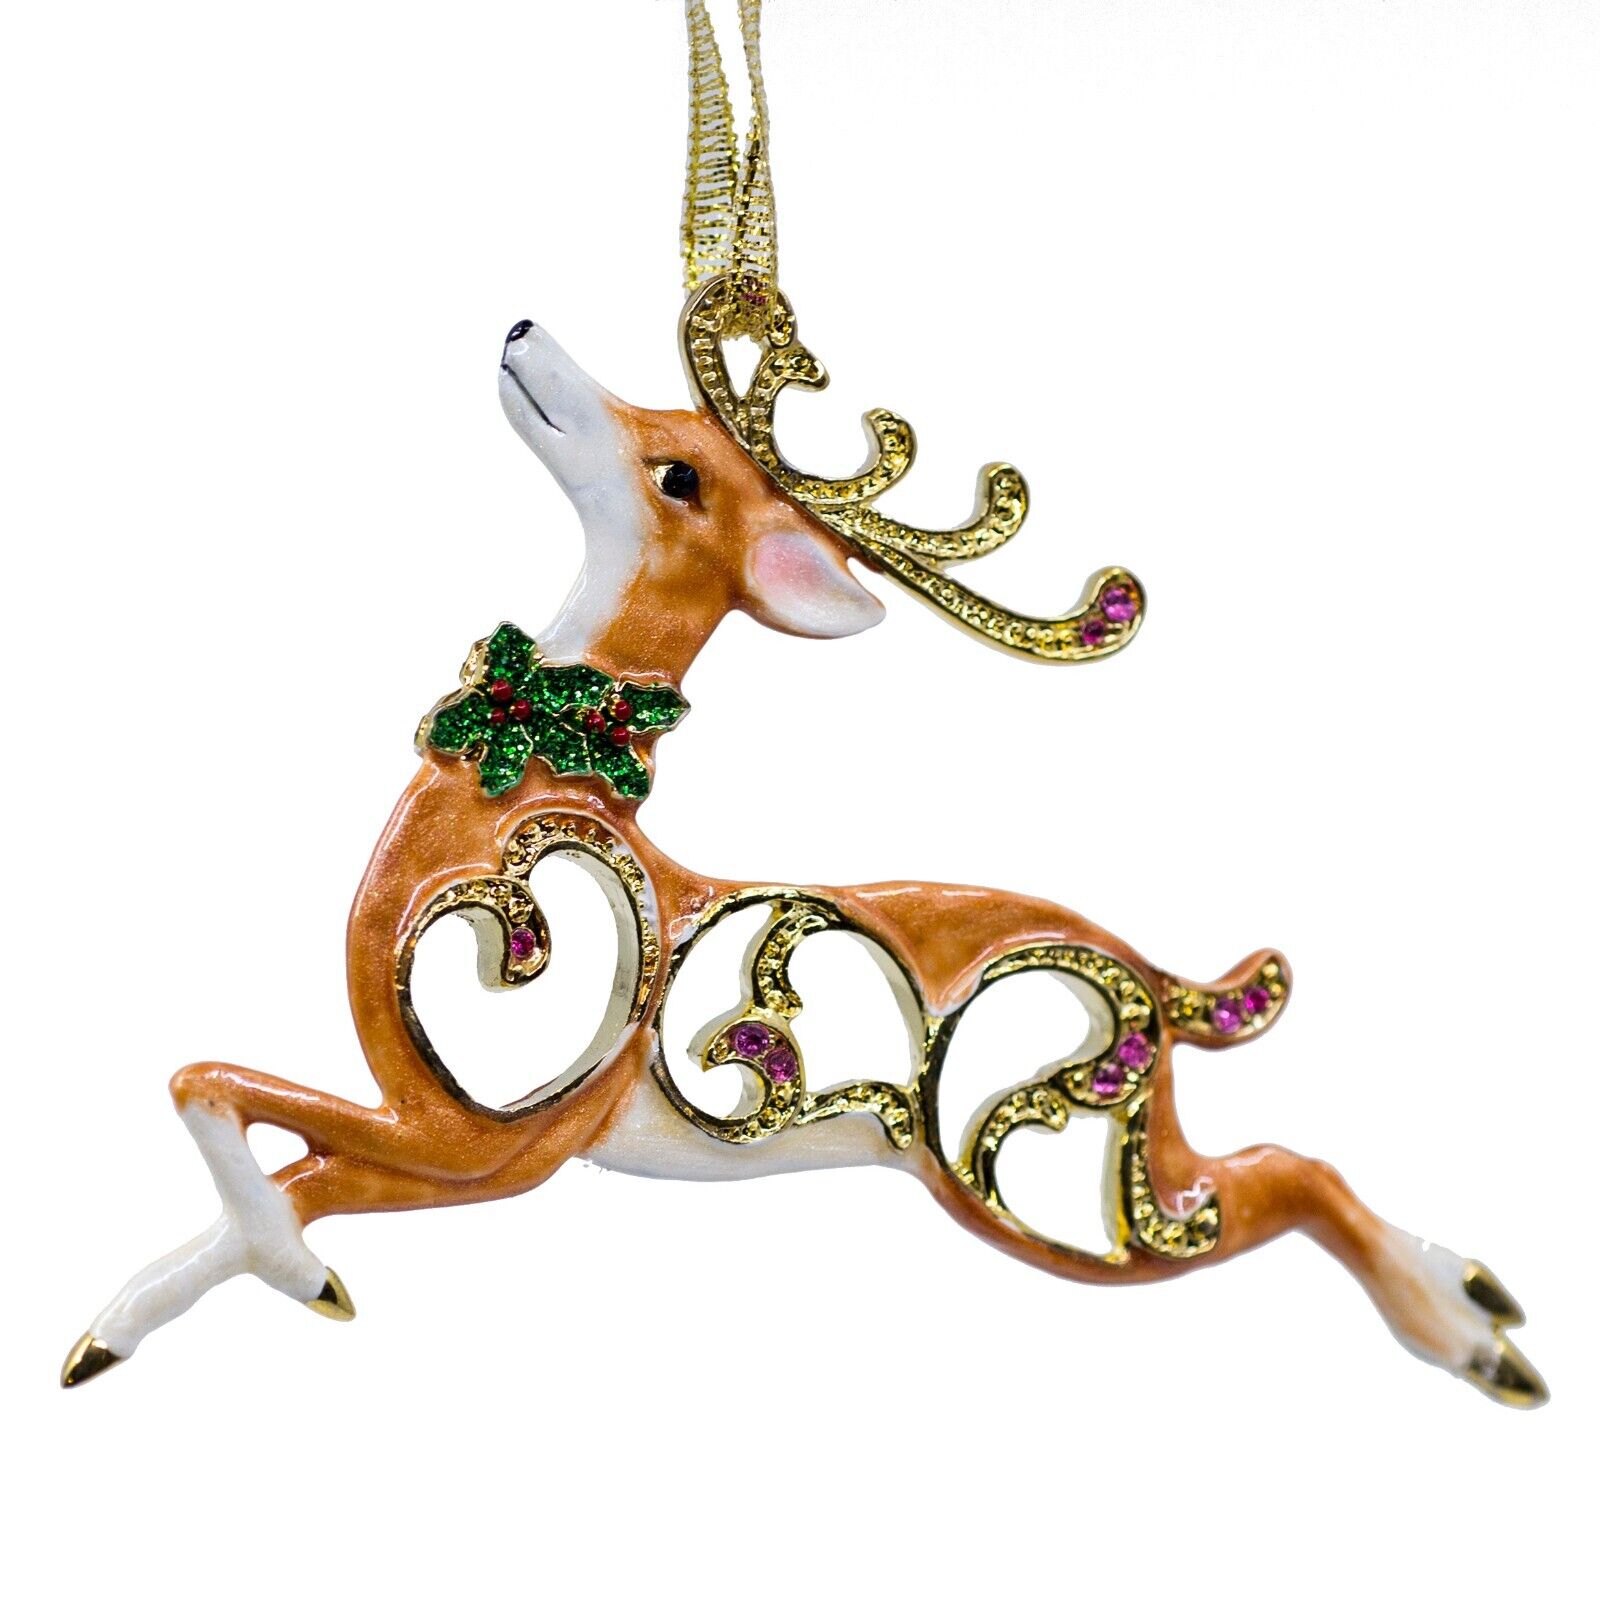 Cloisonne Enameled Metal Reindeer Ornament Double-Sided With Austrian Crystals